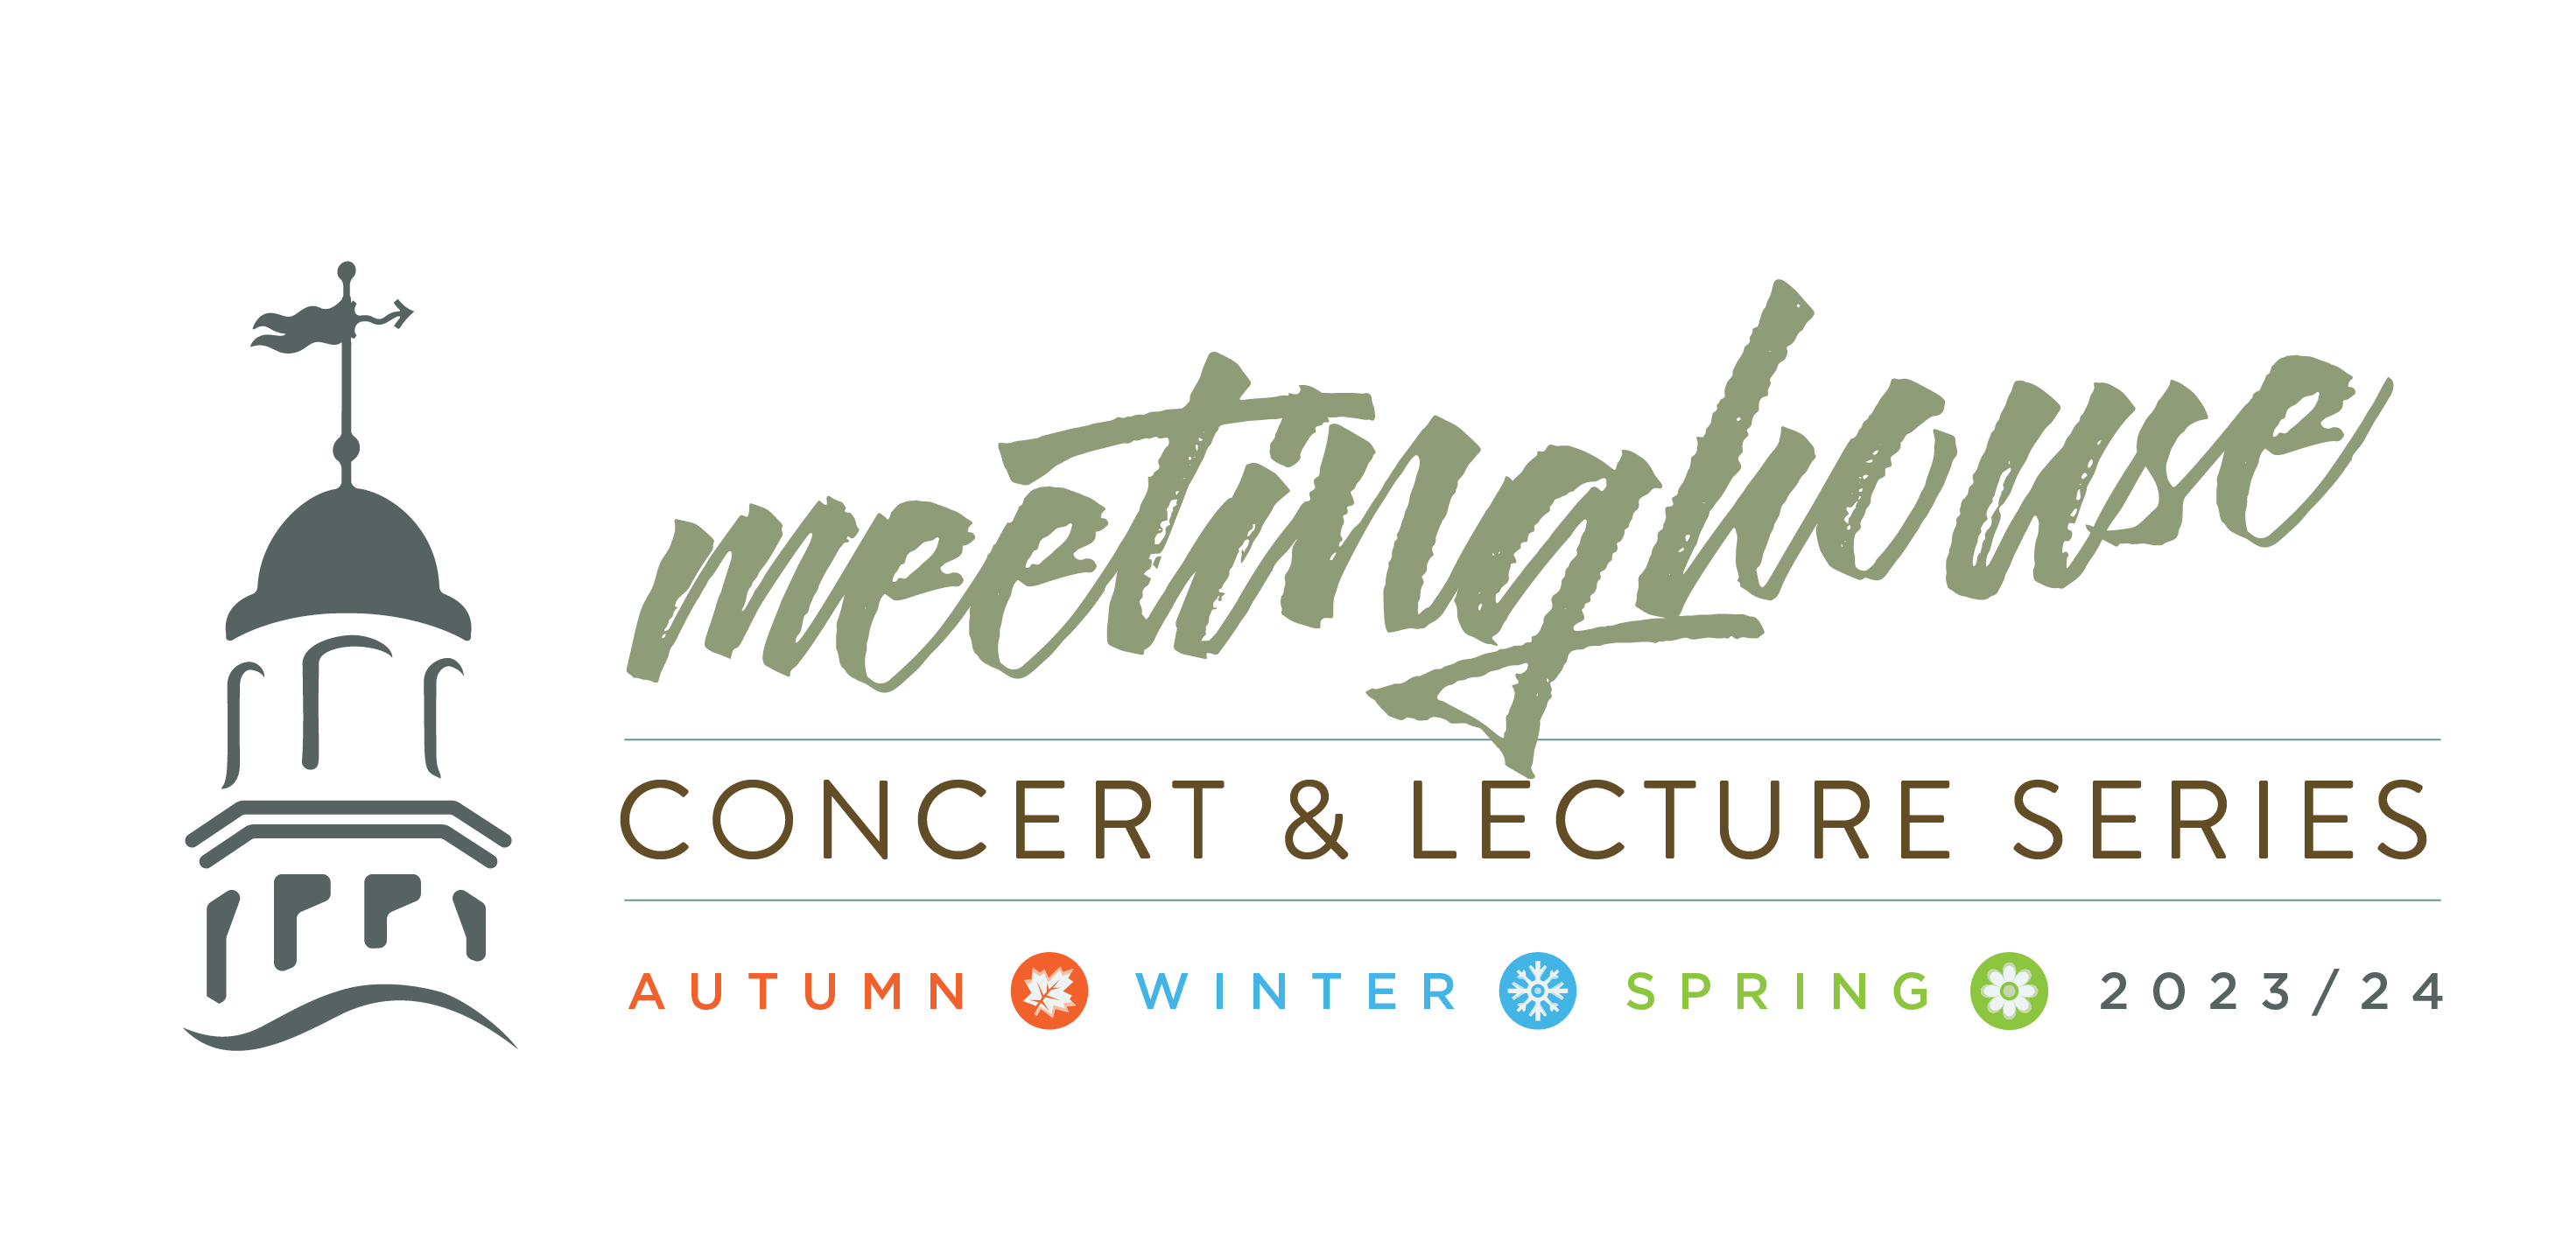 Gloucester Meetinghouse Concert and Lecture Series